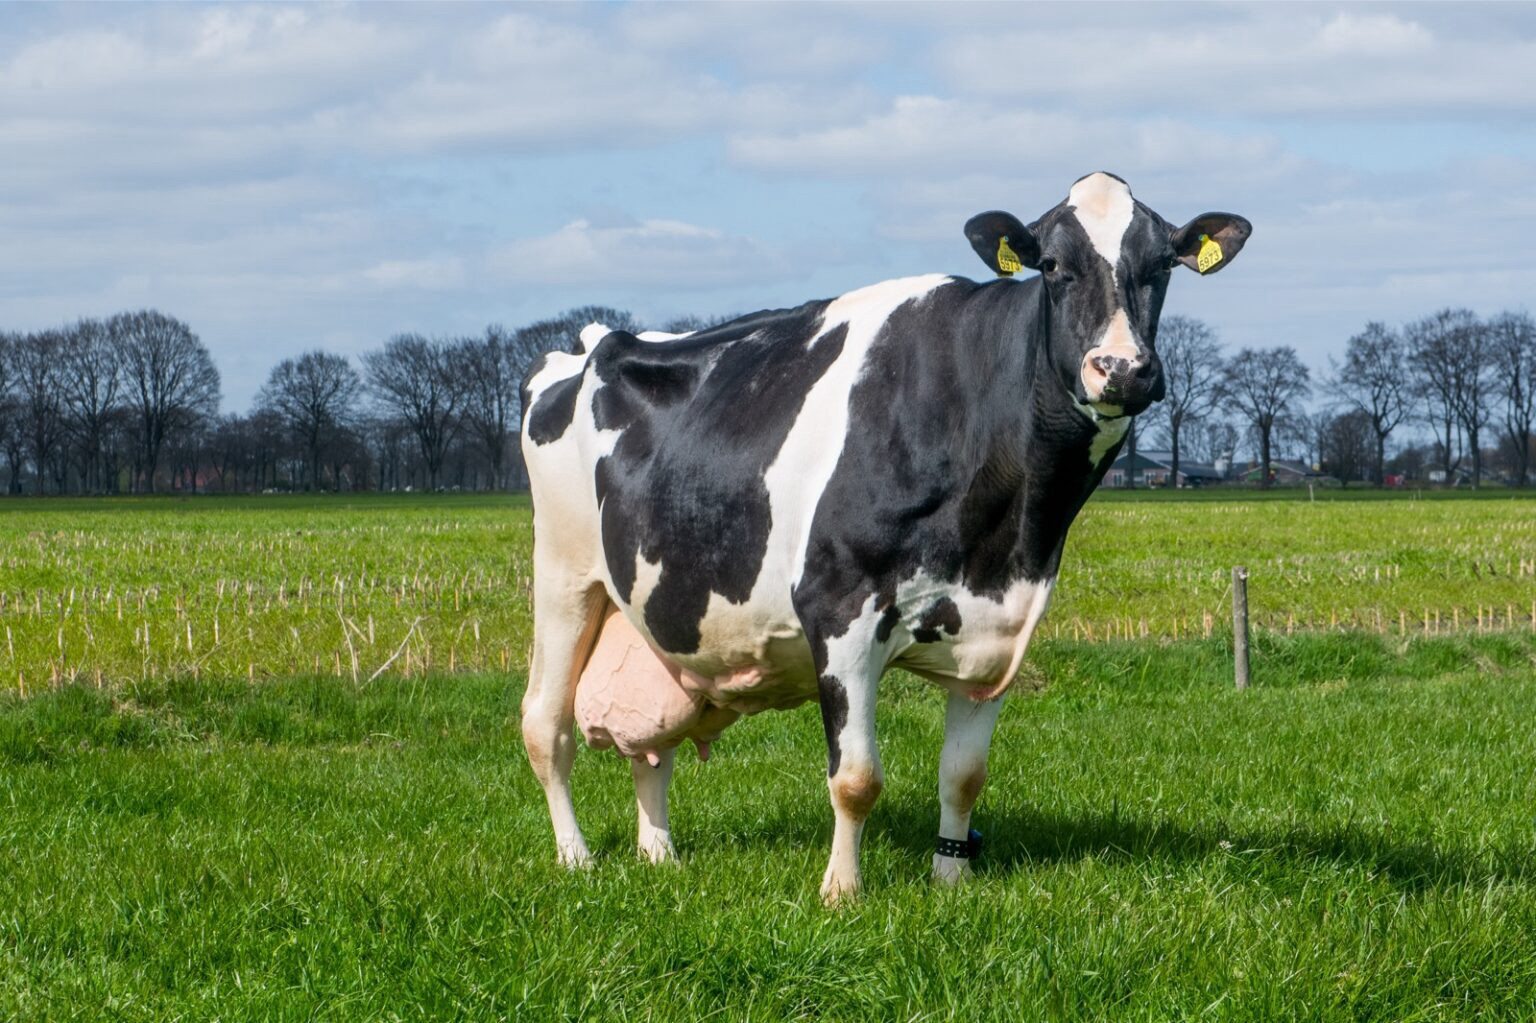 Aged almost 16, win 395 daughter big clara 123 achieved production of over 200,139 kg of milk